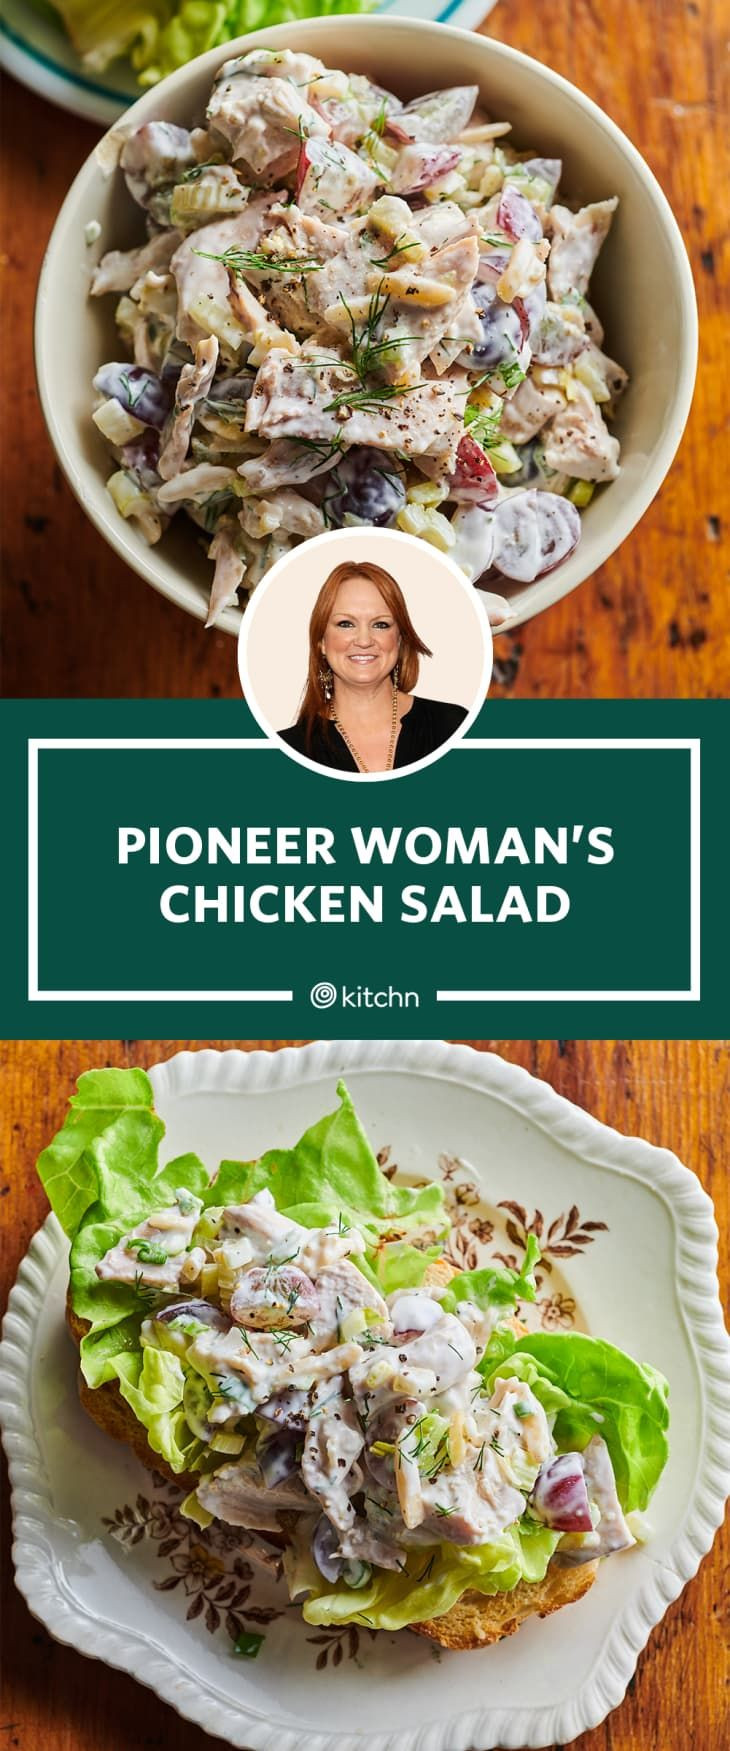 Pioneer Woman Chicken Salad Recipe
 The Pioneer Woman s Chicken Salad Is So Good I Can t Stop